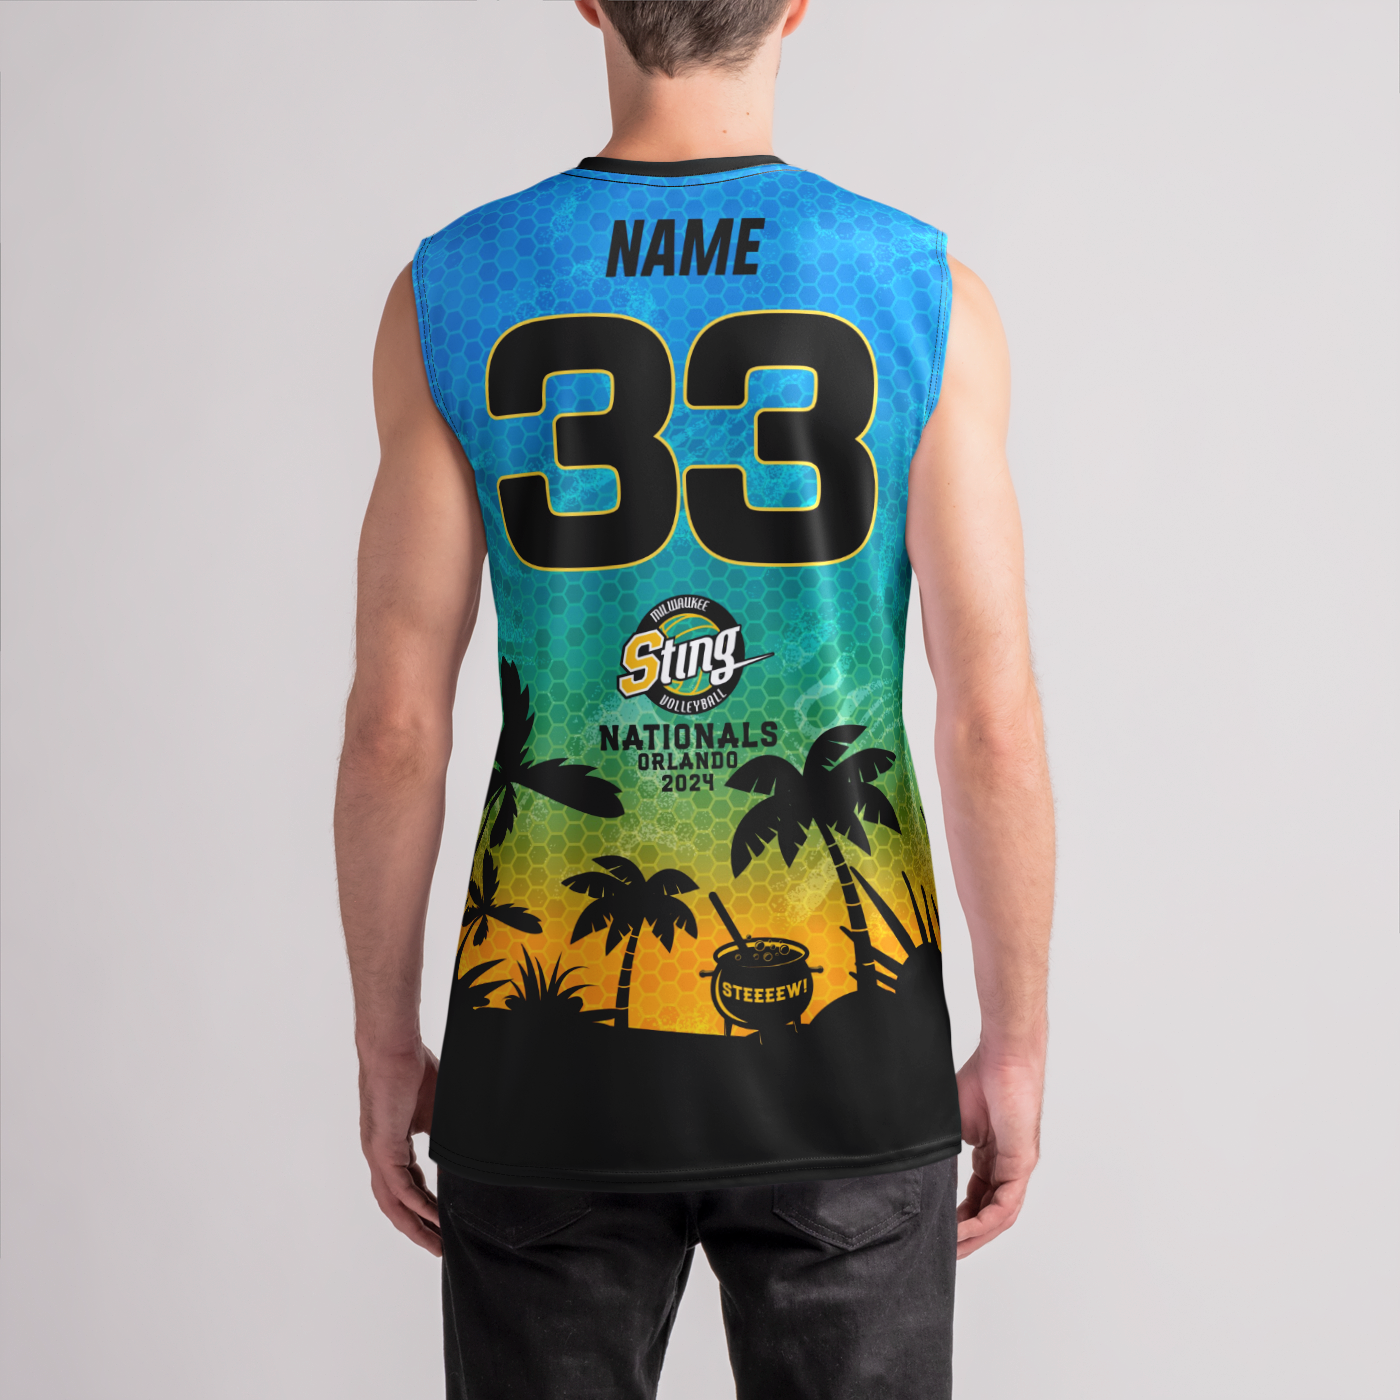 Sting 16-3s Nationals Jersey